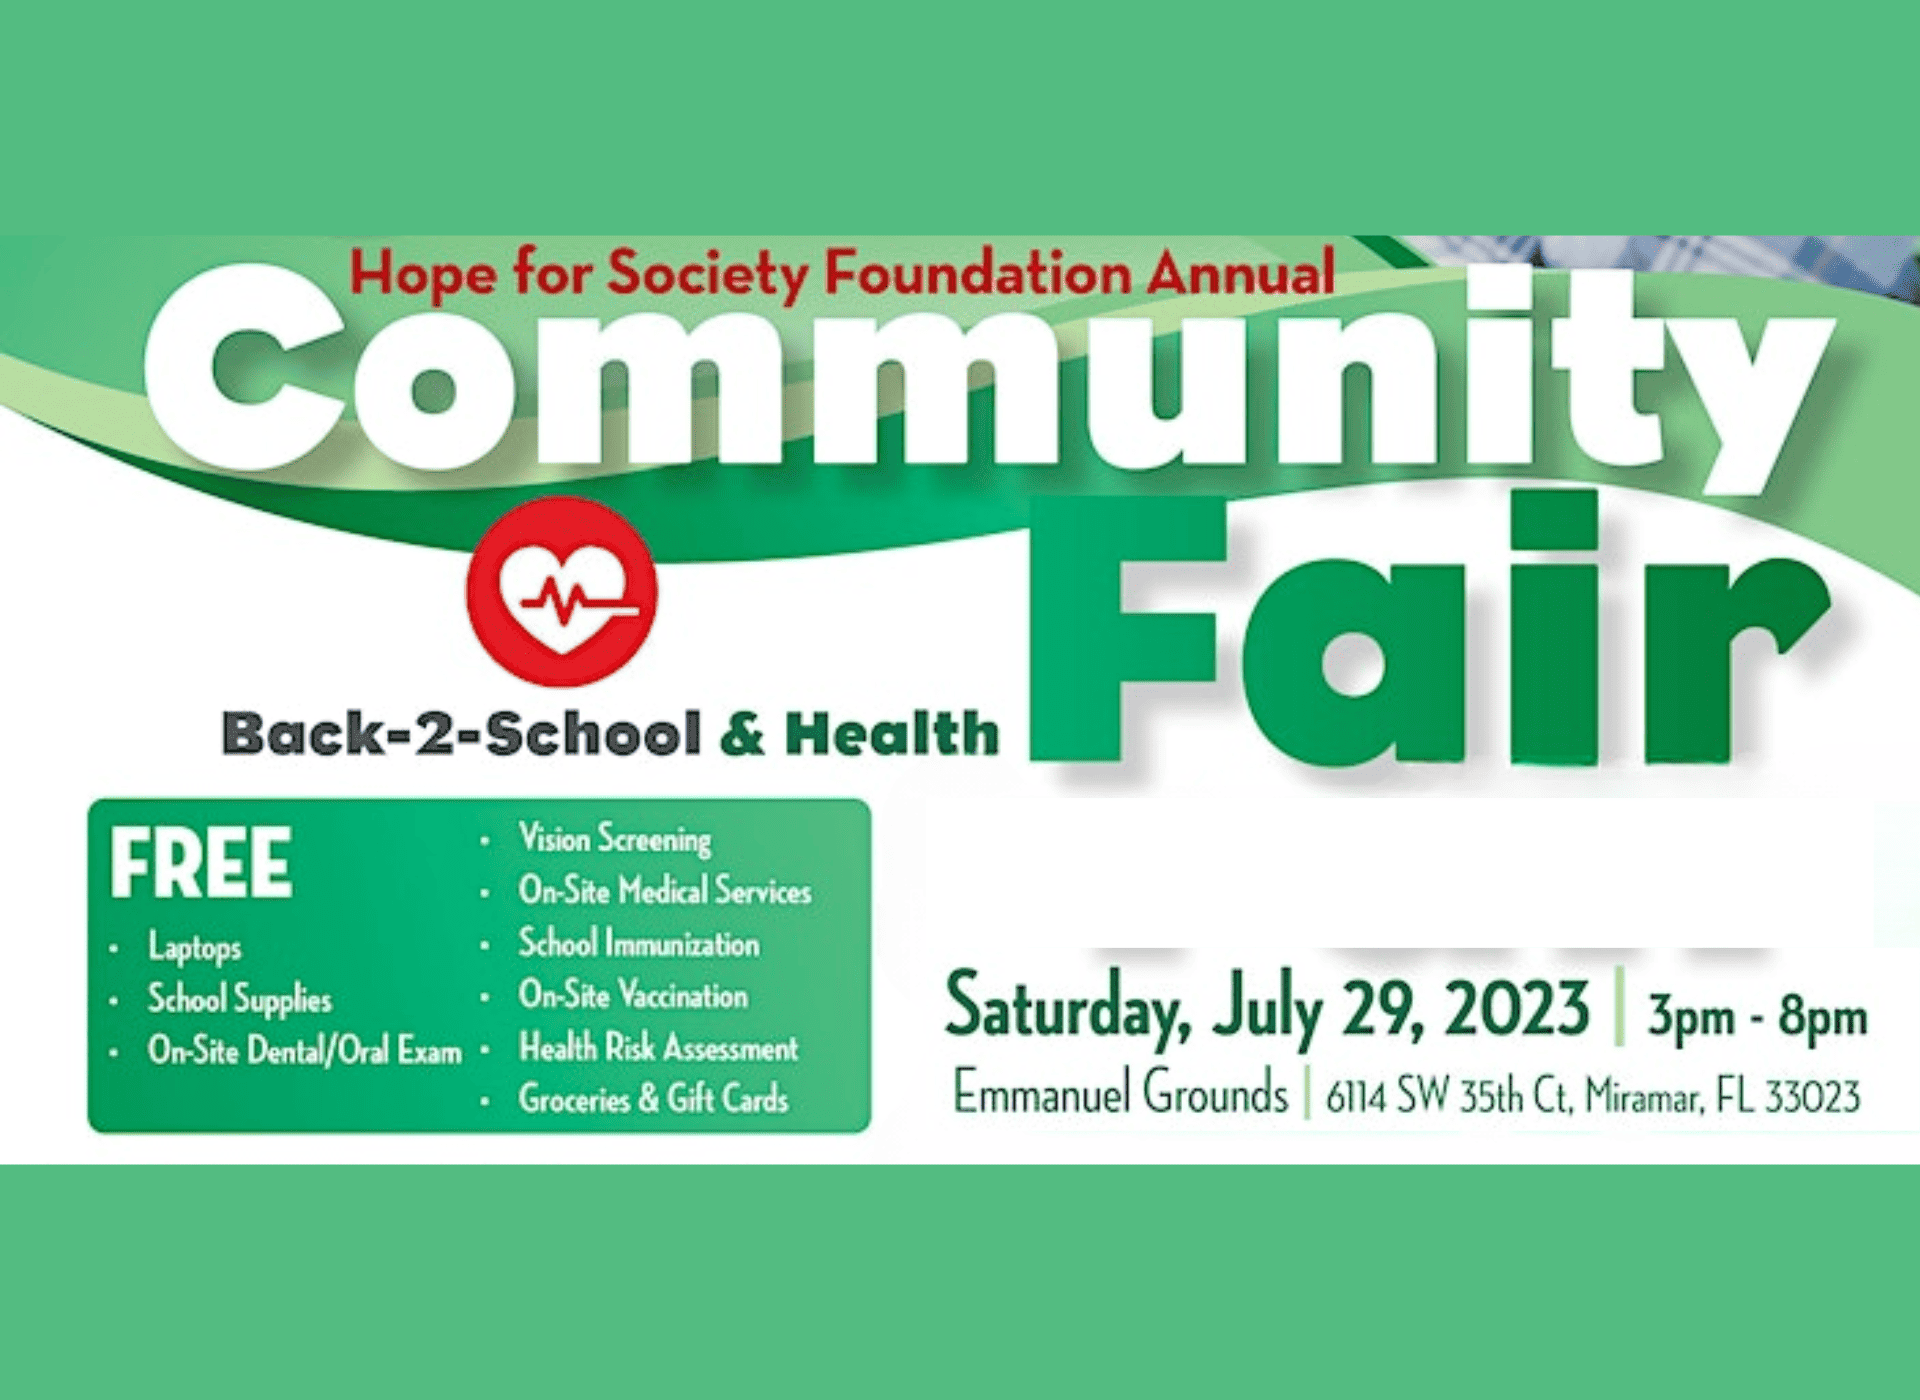 Hope For Society Foundation - Annual Back To School Health and Community Fair - 2023